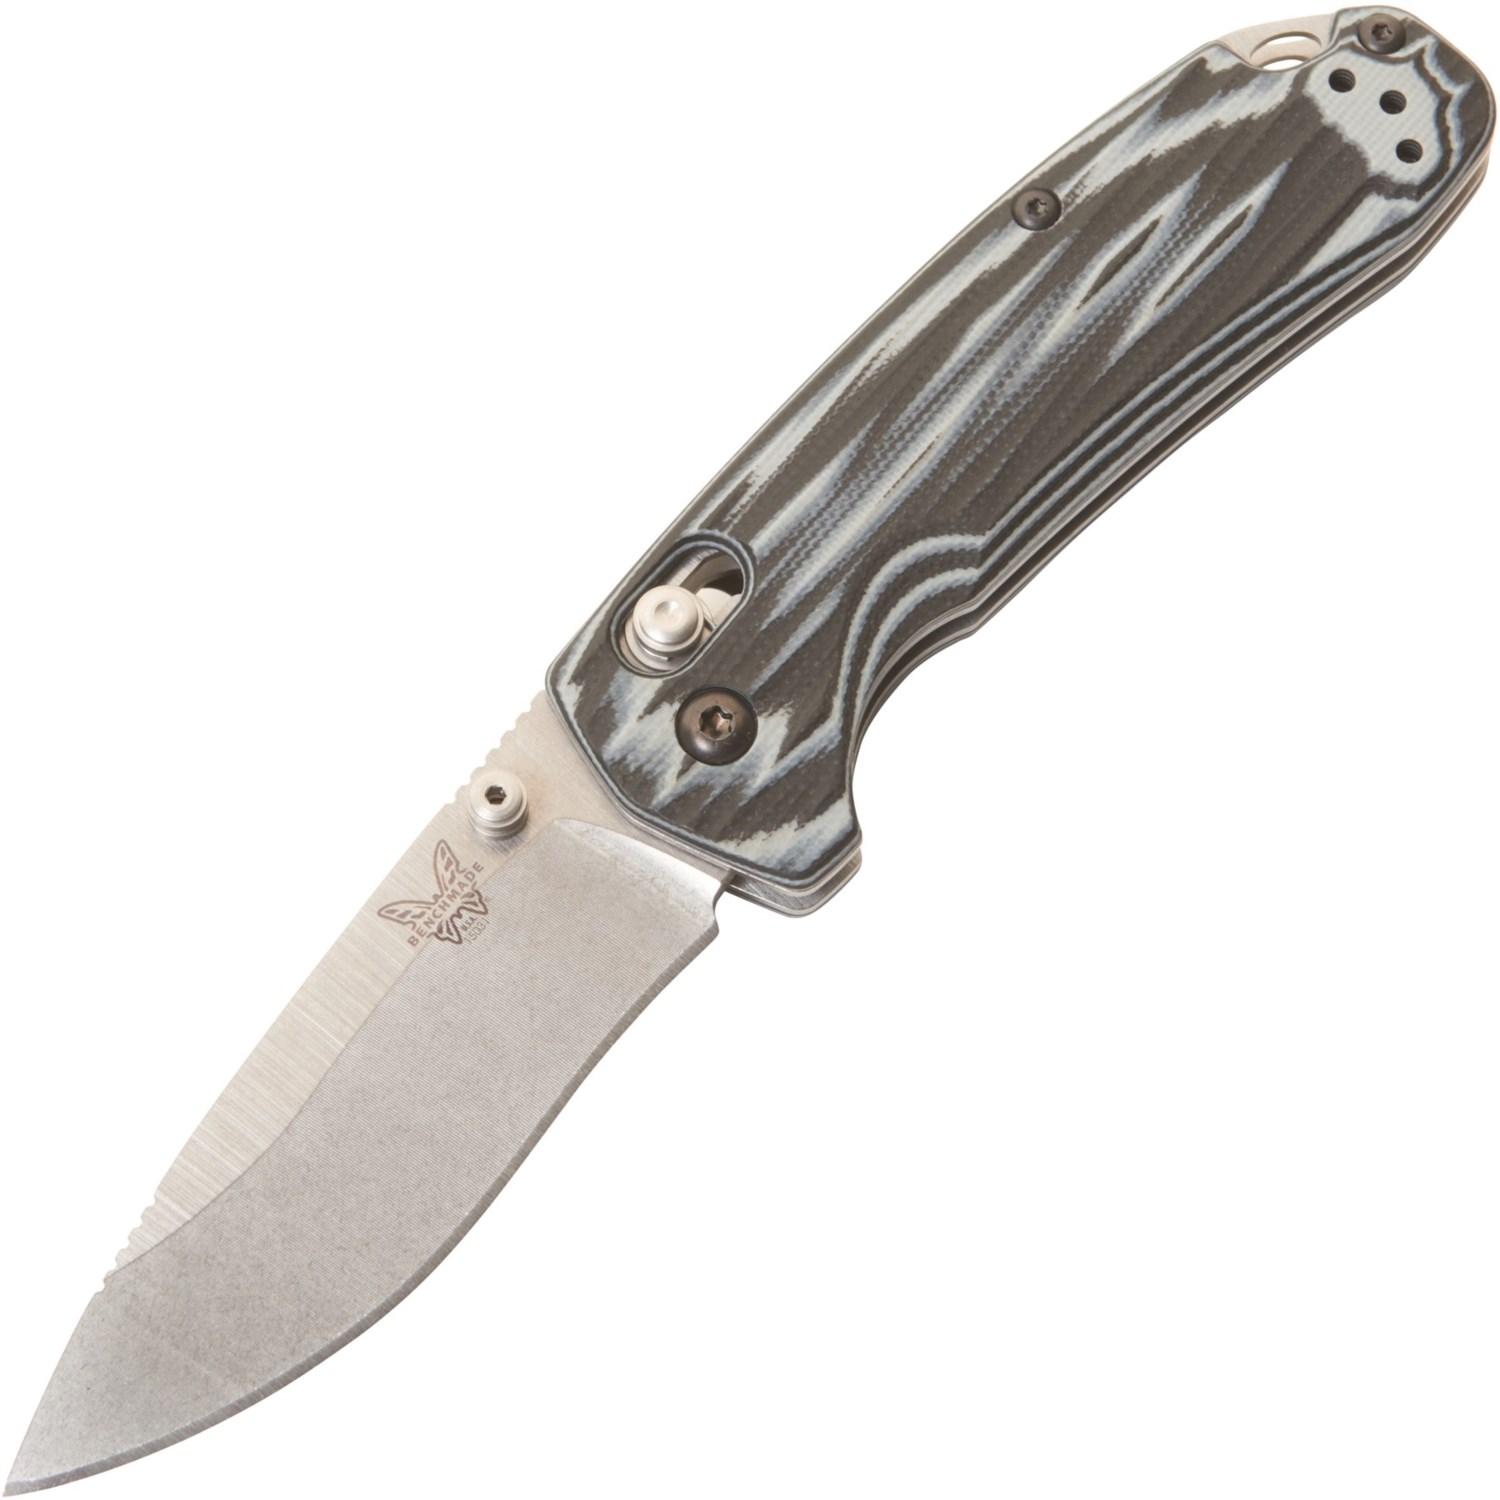 benchmade-north-fork-drop-point-folding-knife-3-in-see-photo~p~30vmh_99~1500.453.jpg